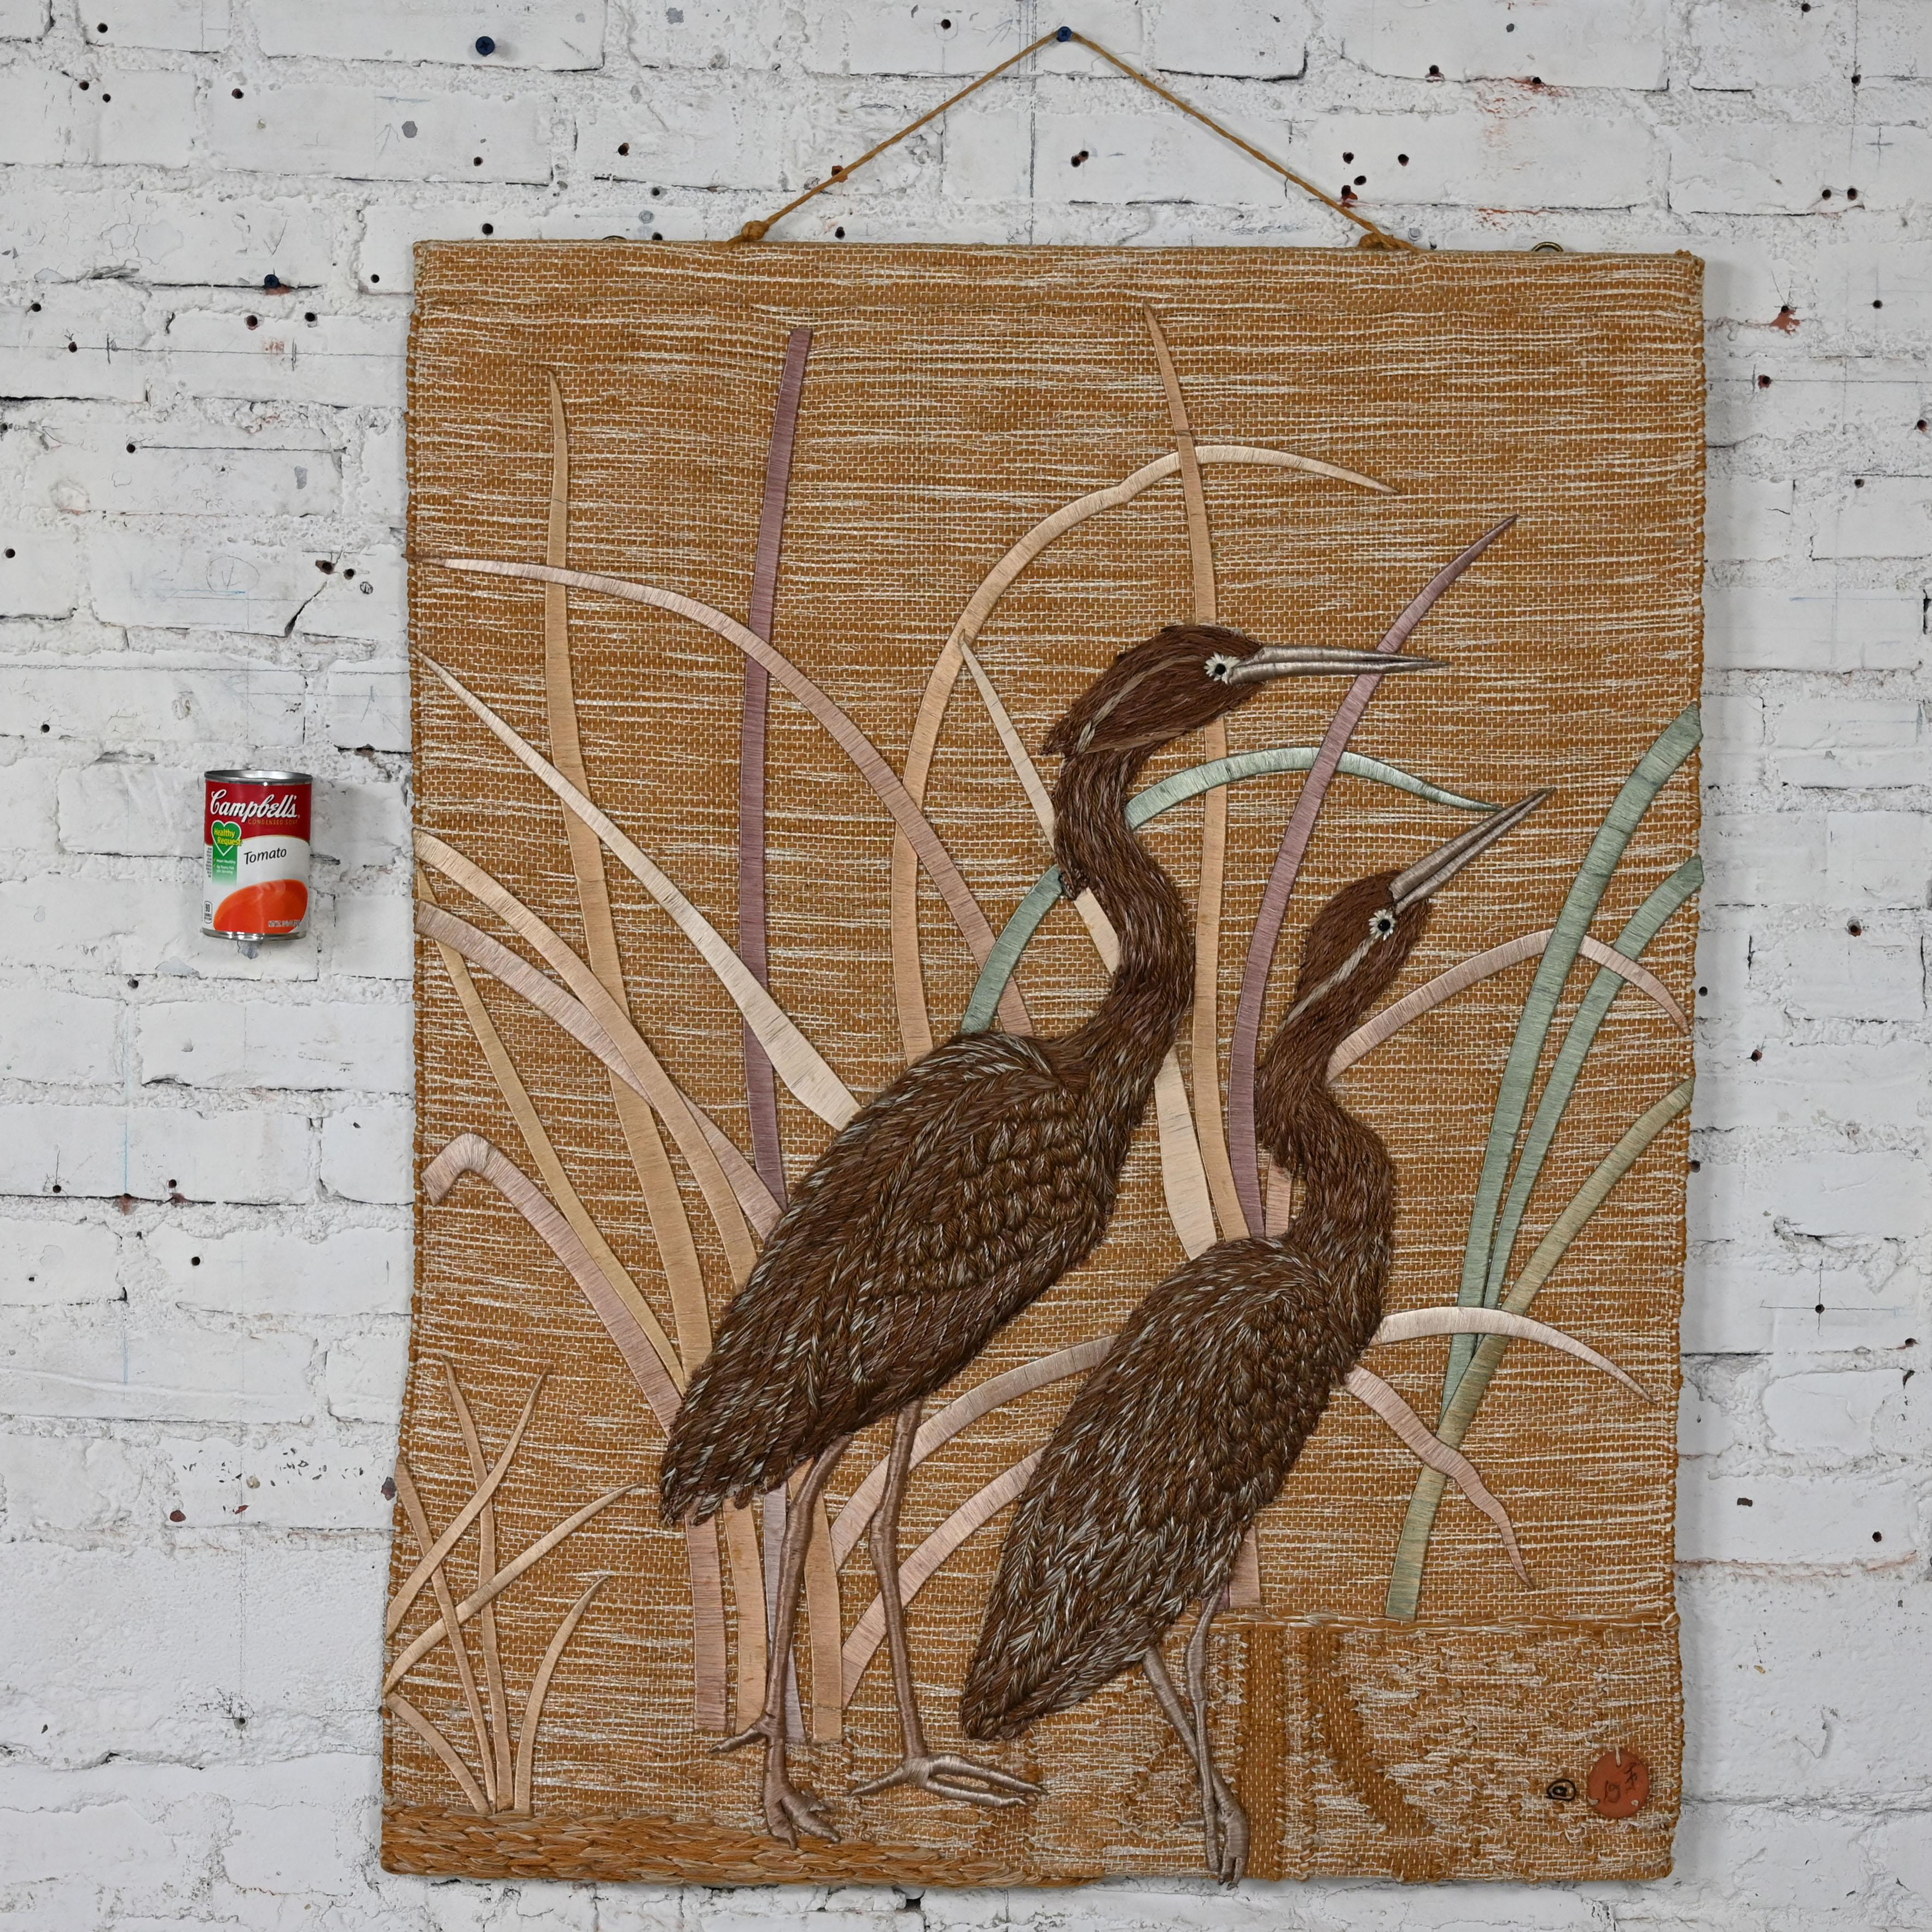 1992 Modern Textile Woven Cranes & Grass Wall Hanging #418 by Don Freedman  For Sale 15